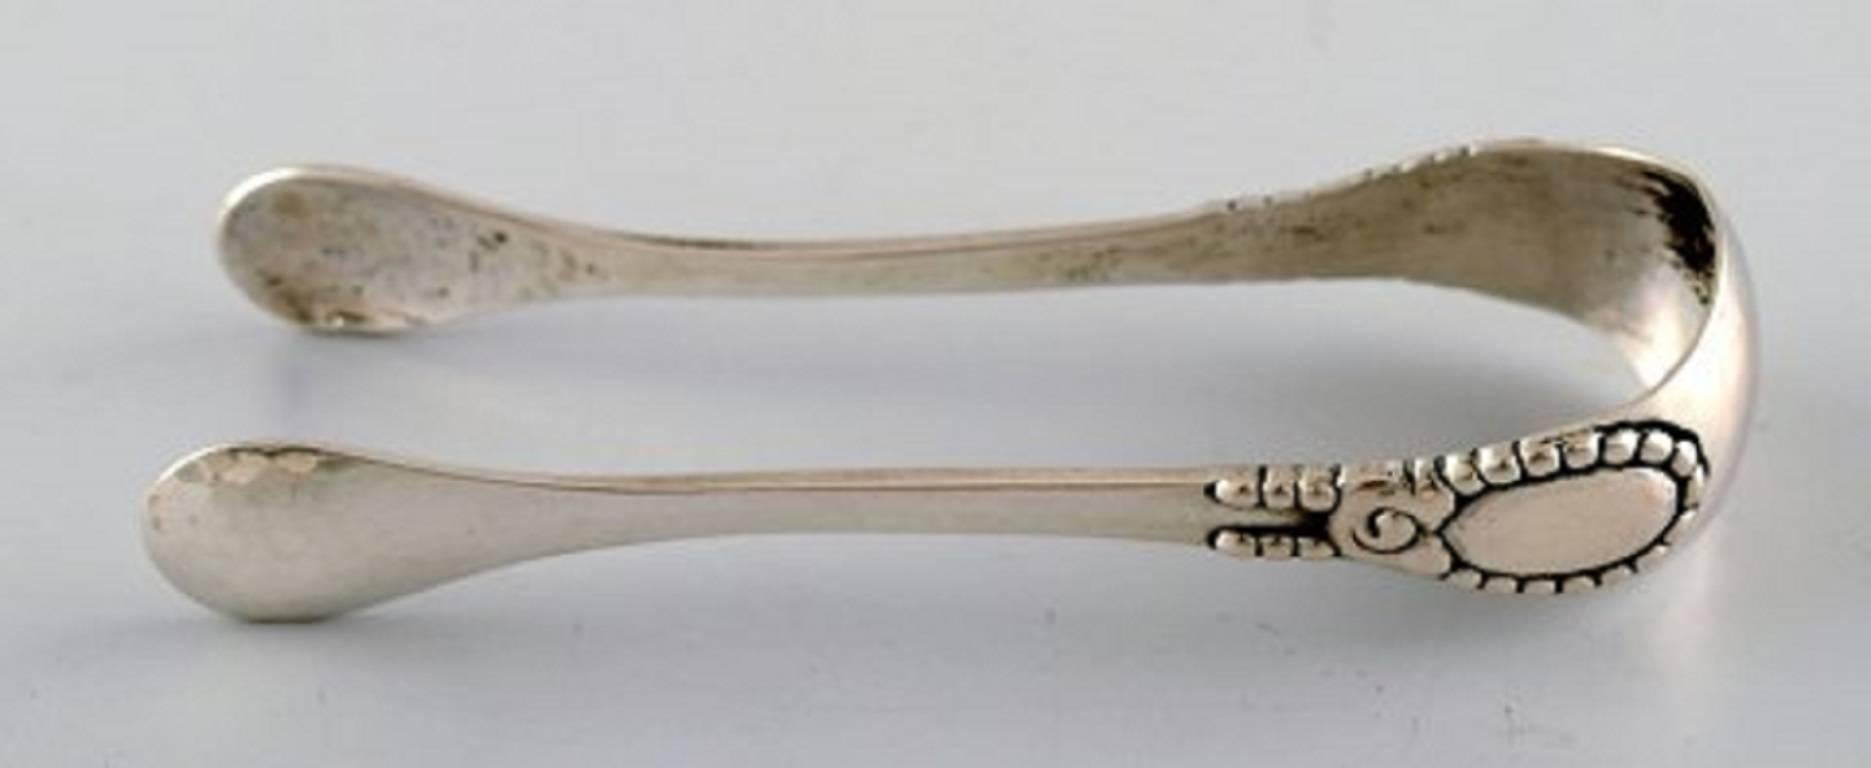 Evald Nielsen number 13, sugar tongs.
Measures 12 cm.
Stamped, 1920s, Denmark.
In perfect condition.